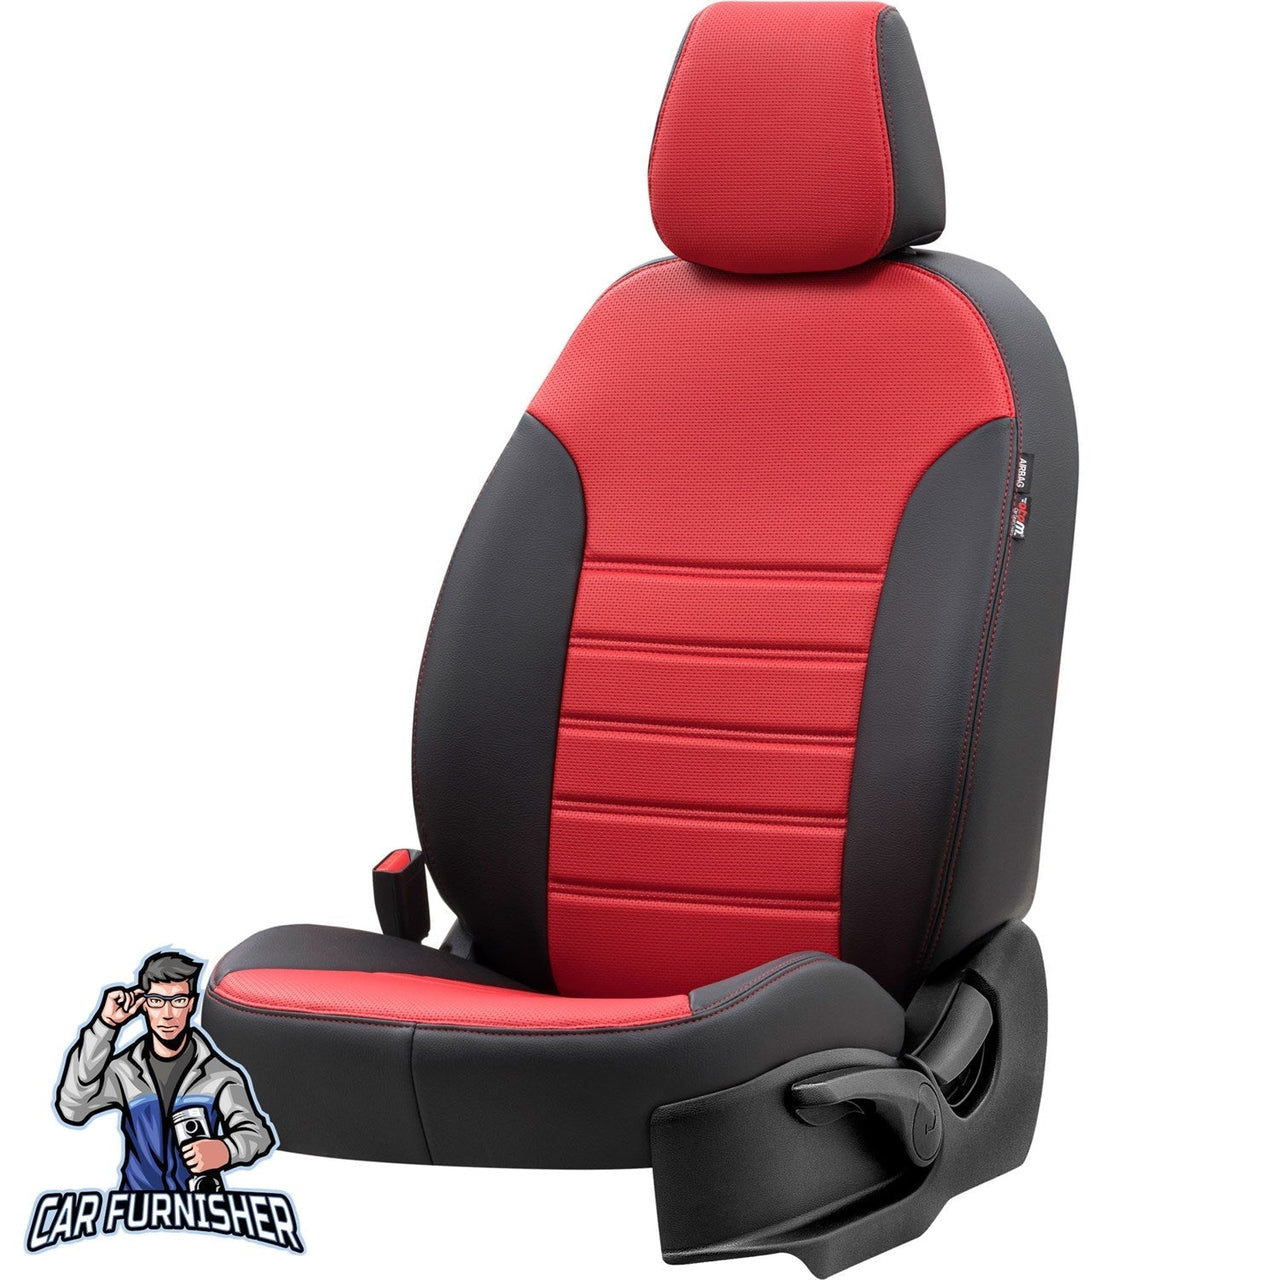 Scania G Seat Cover New York Leather Design Red Front Seats (2 Seats + Handrest + Headrests) Leather